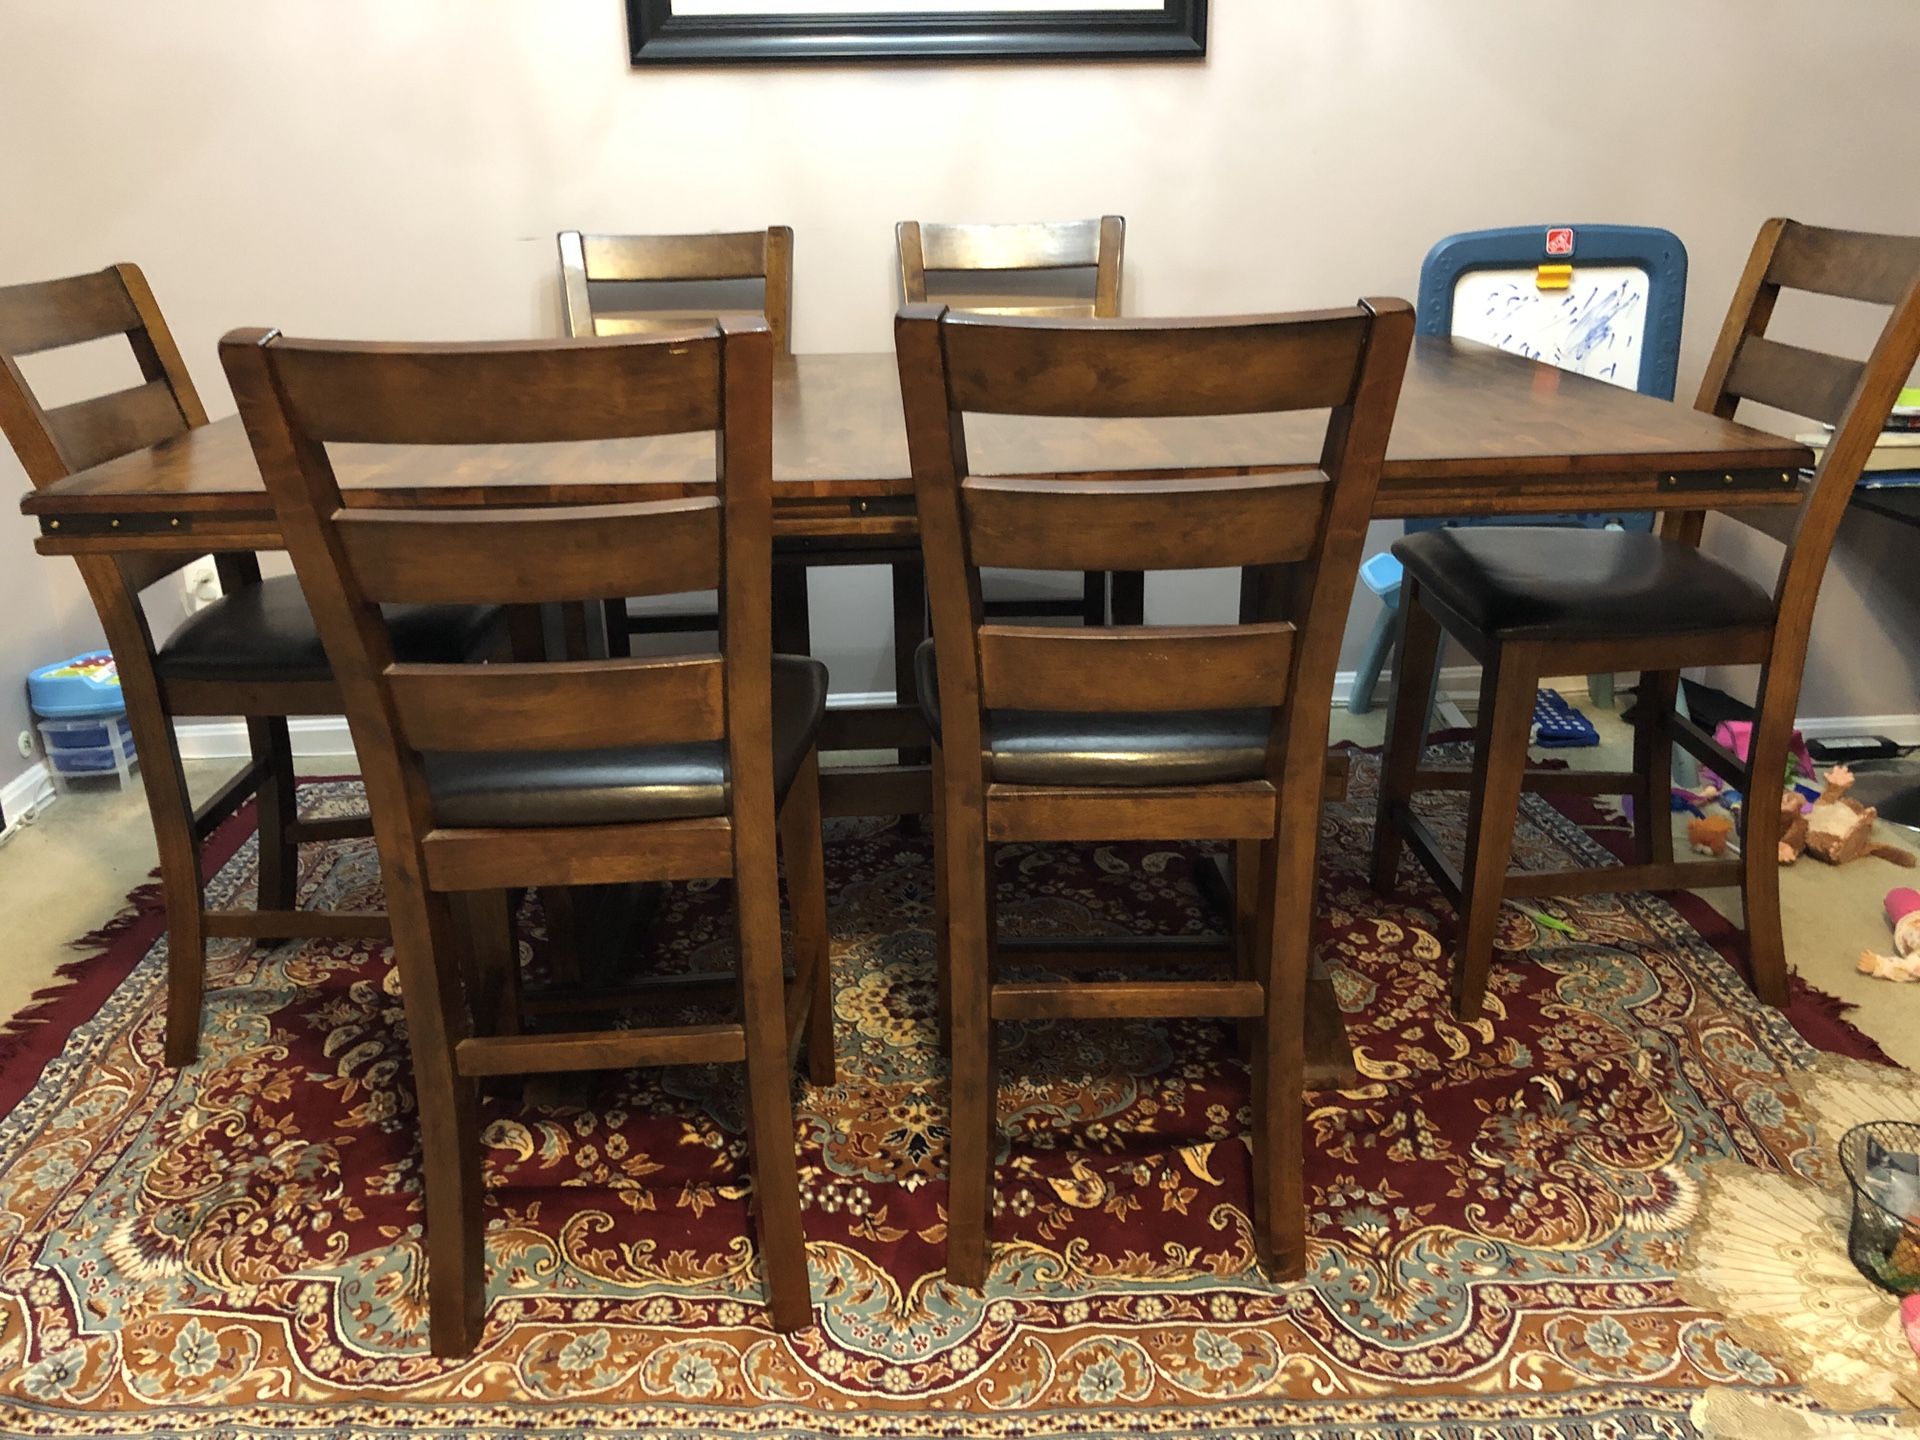 Dinning Table for sales. Look like brand new...